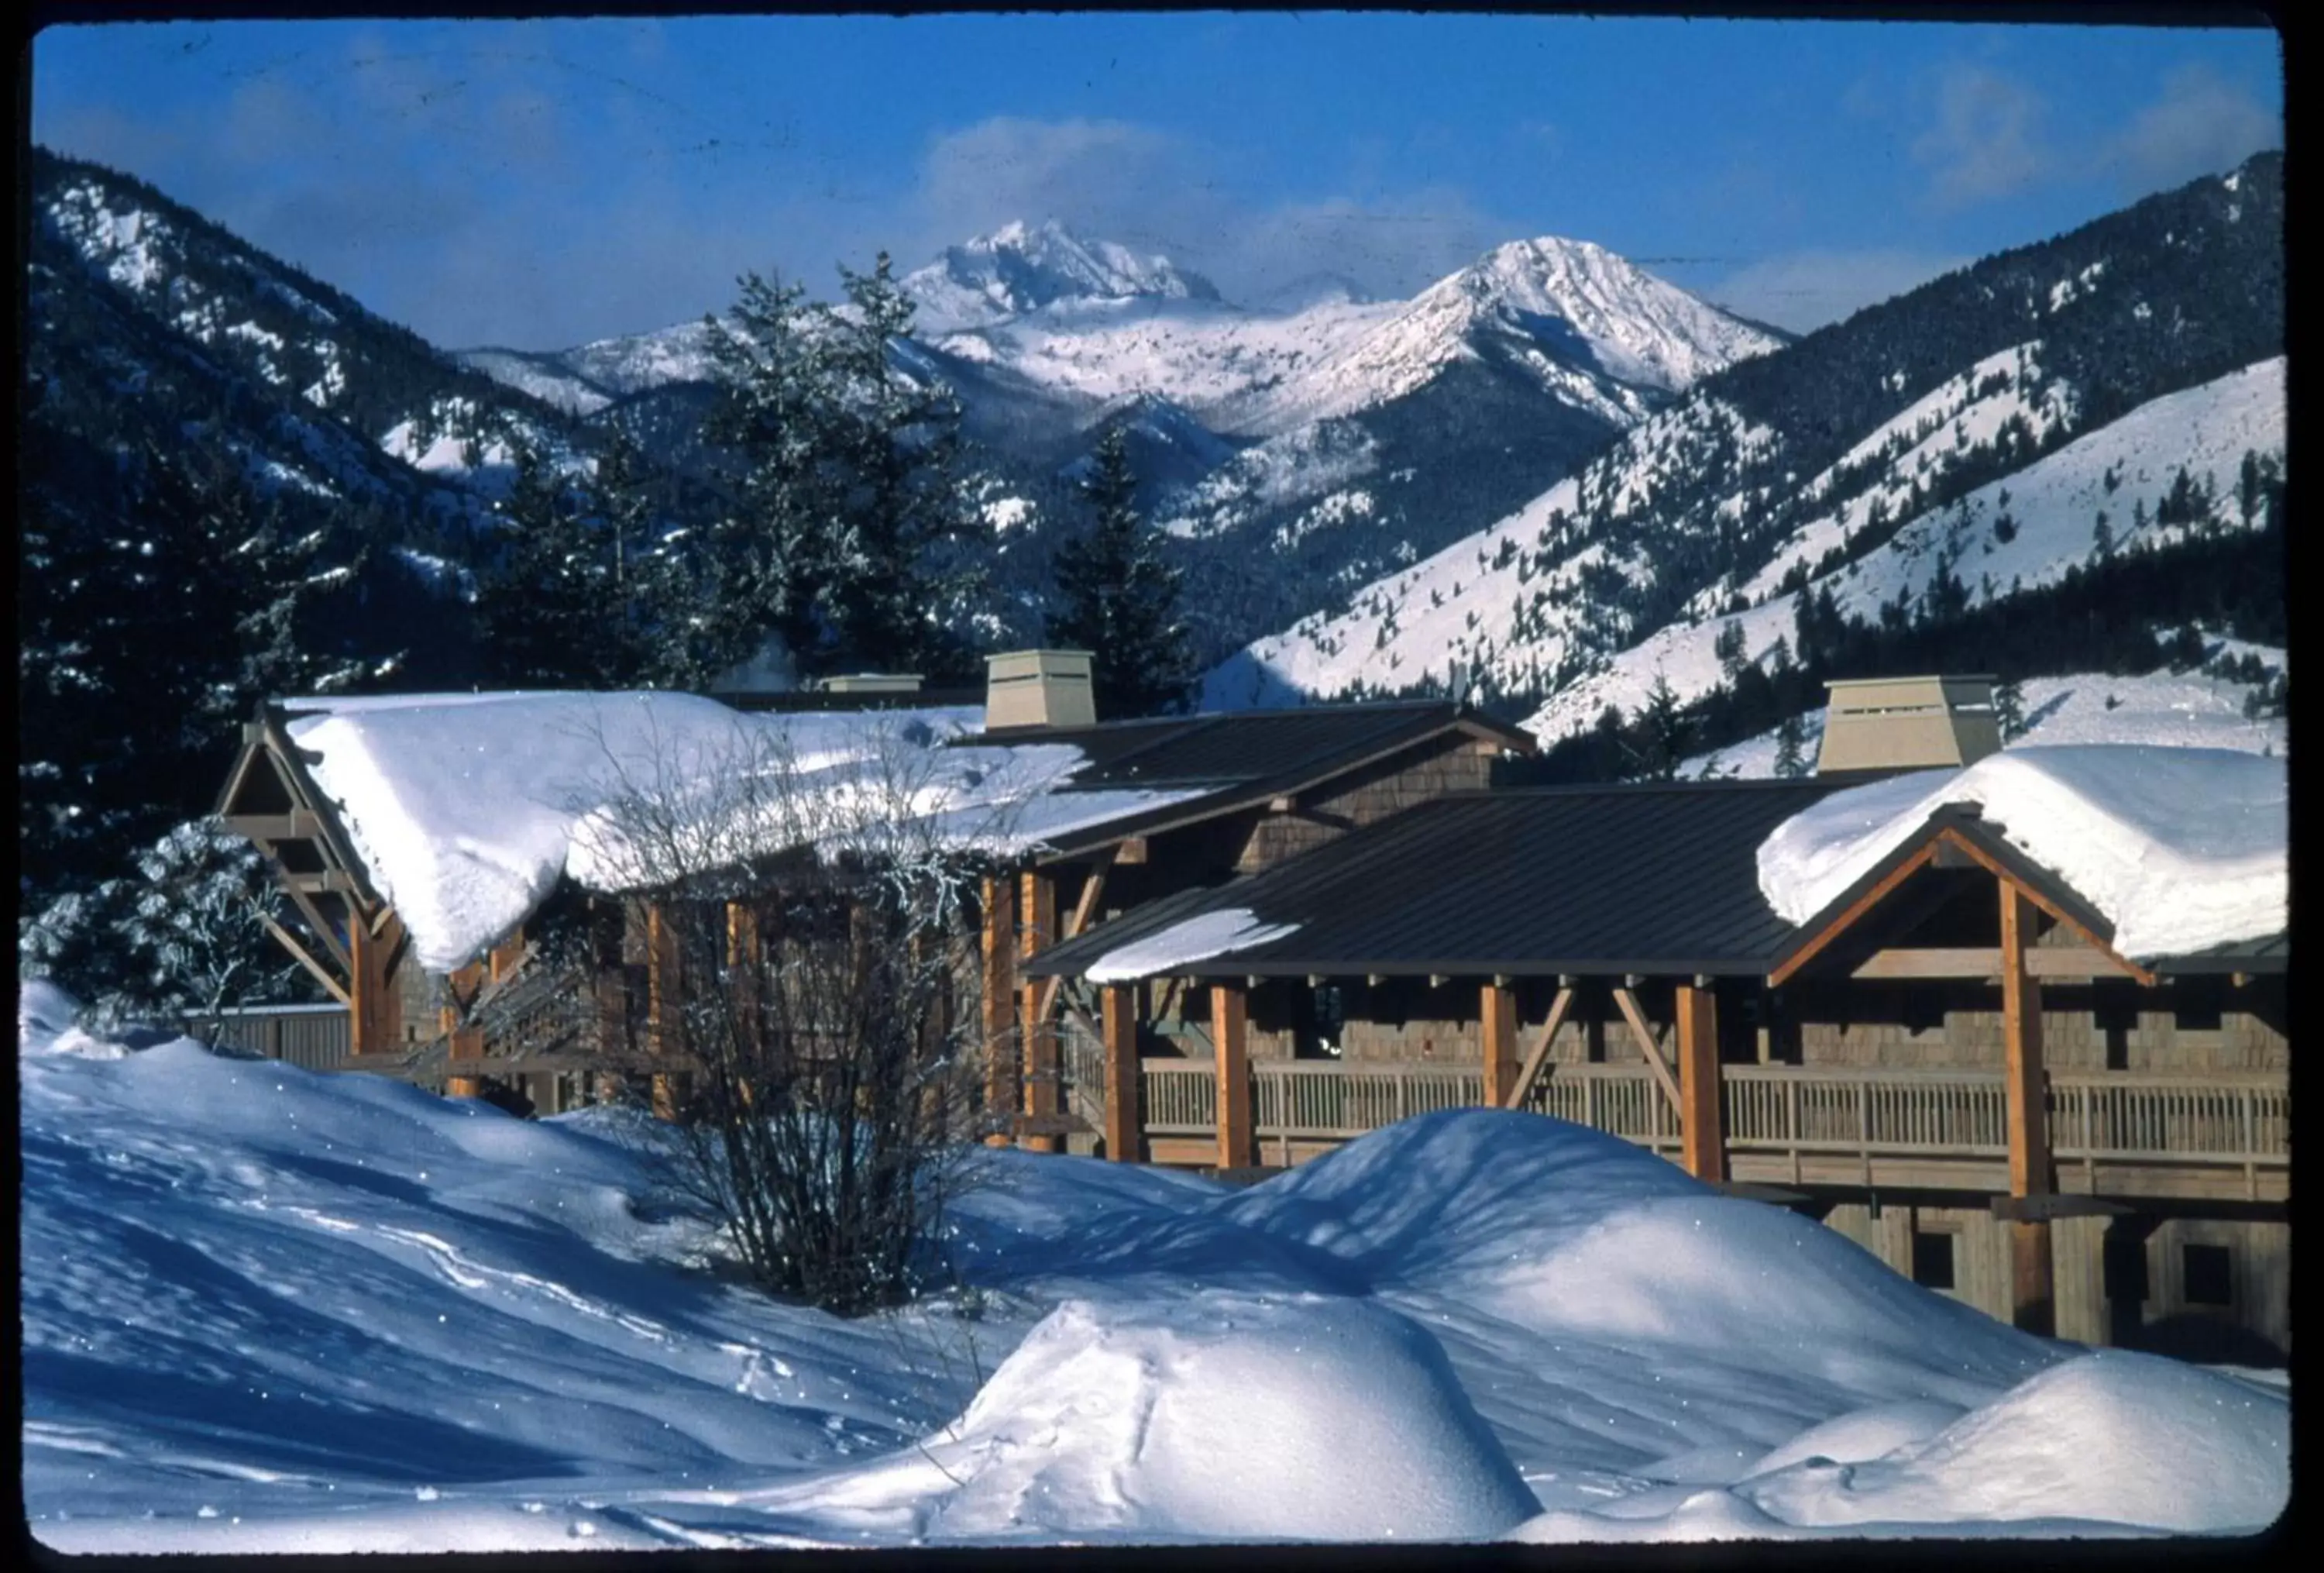 Property building, Winter in Sun Mountain Lodge